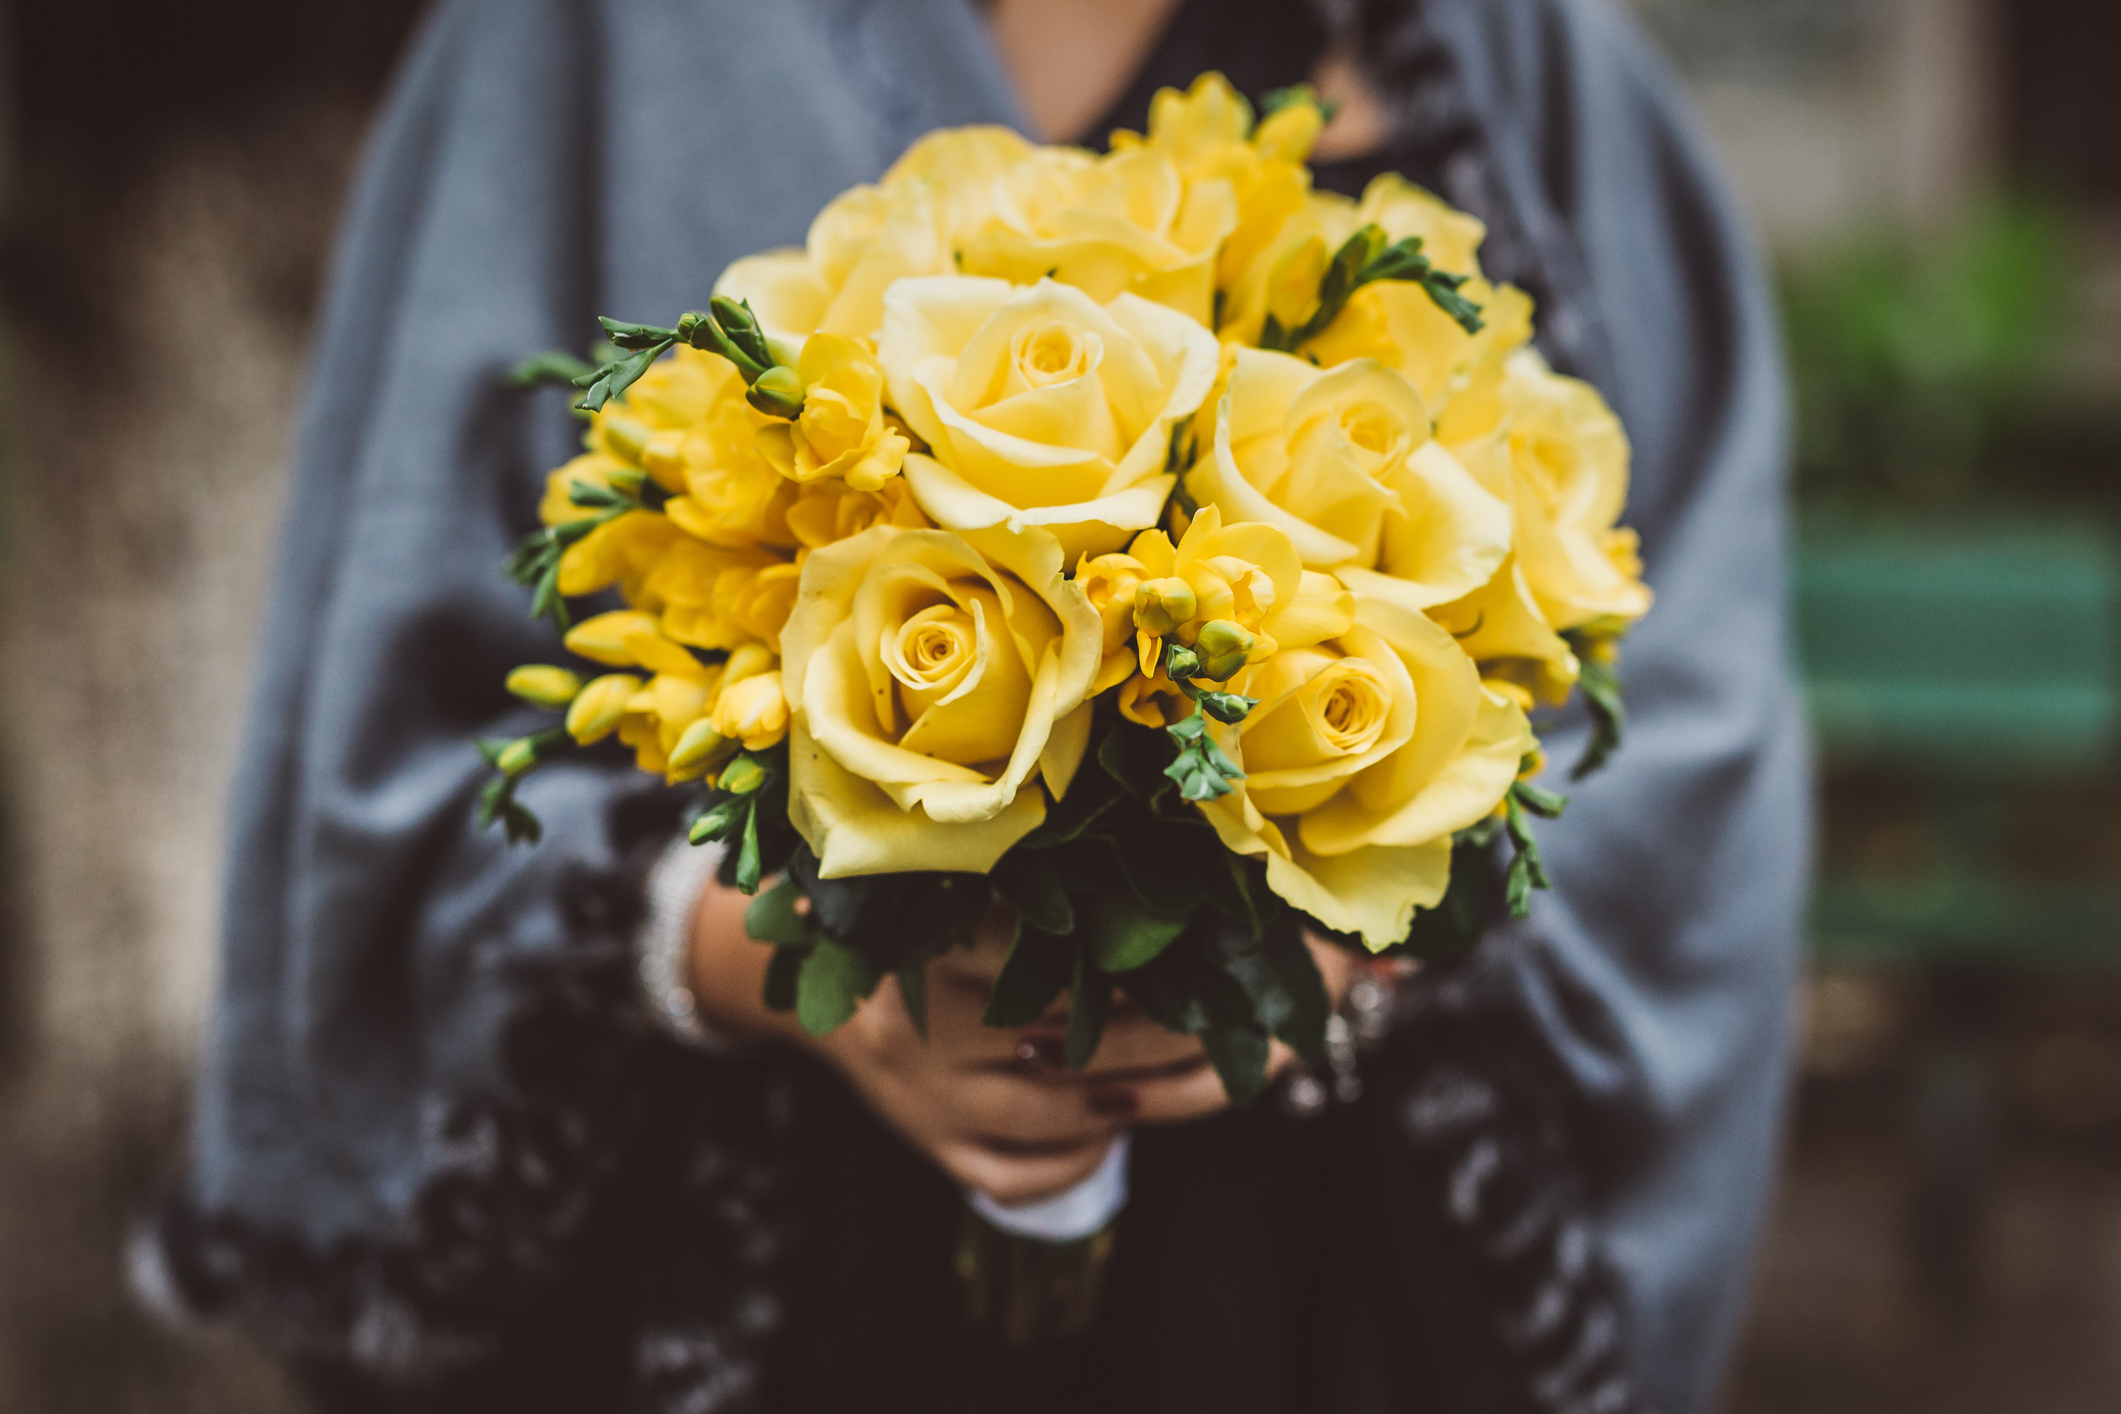 PHOTO: A woman holds a bouquet of yellow roses in this stock image. 